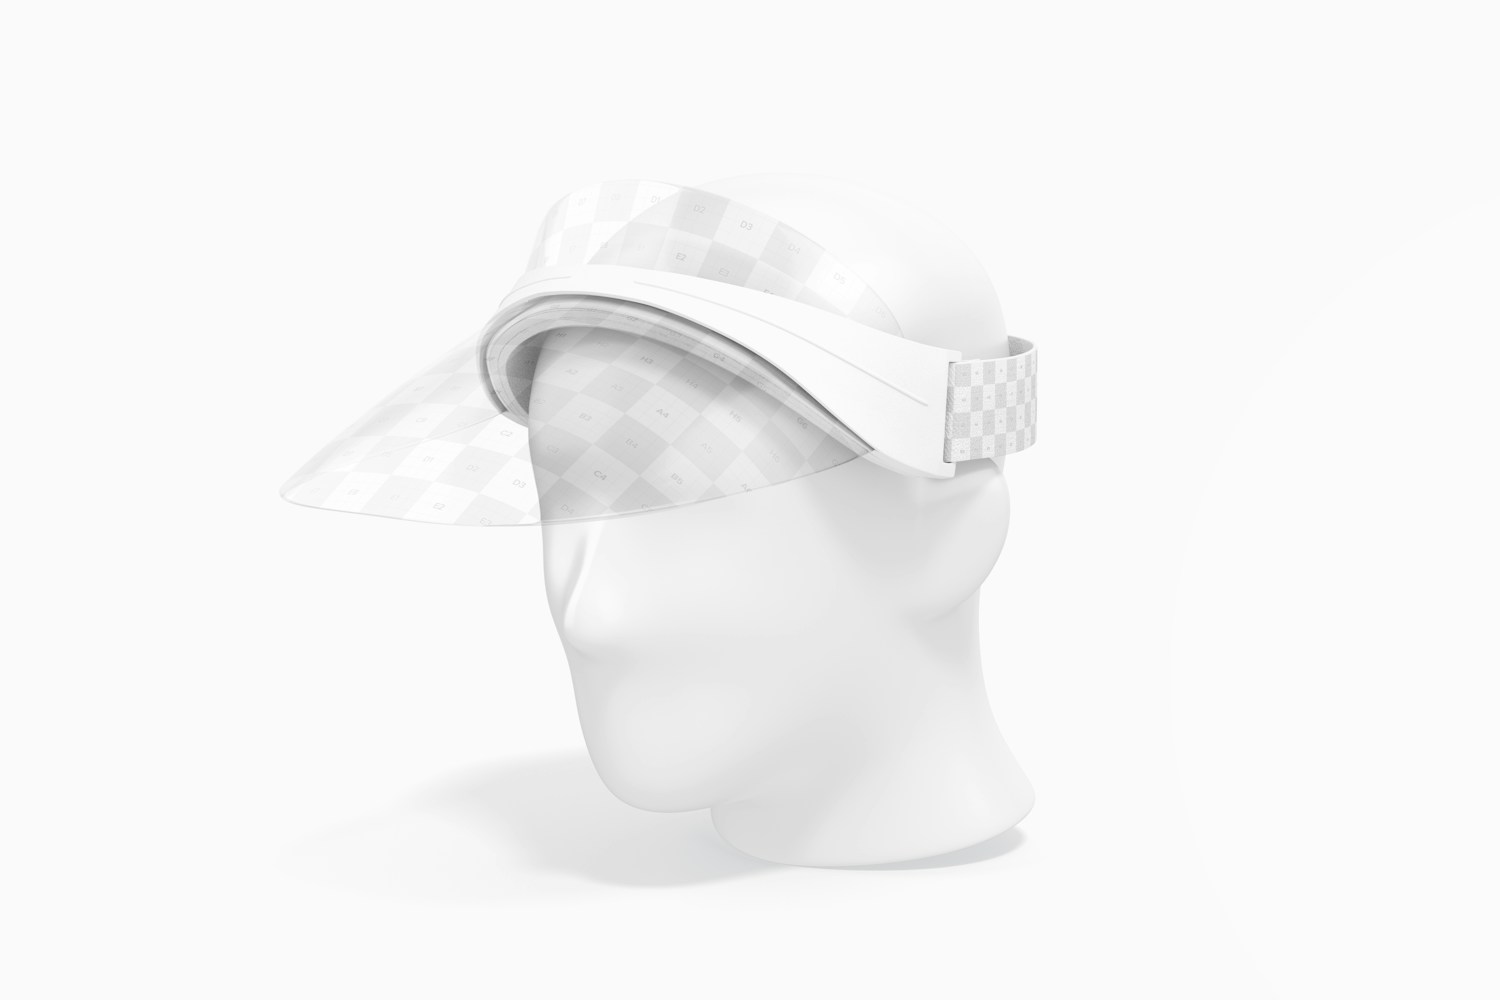 Clear Plastic Visor Cap Mockup, 3/4 Front Right View